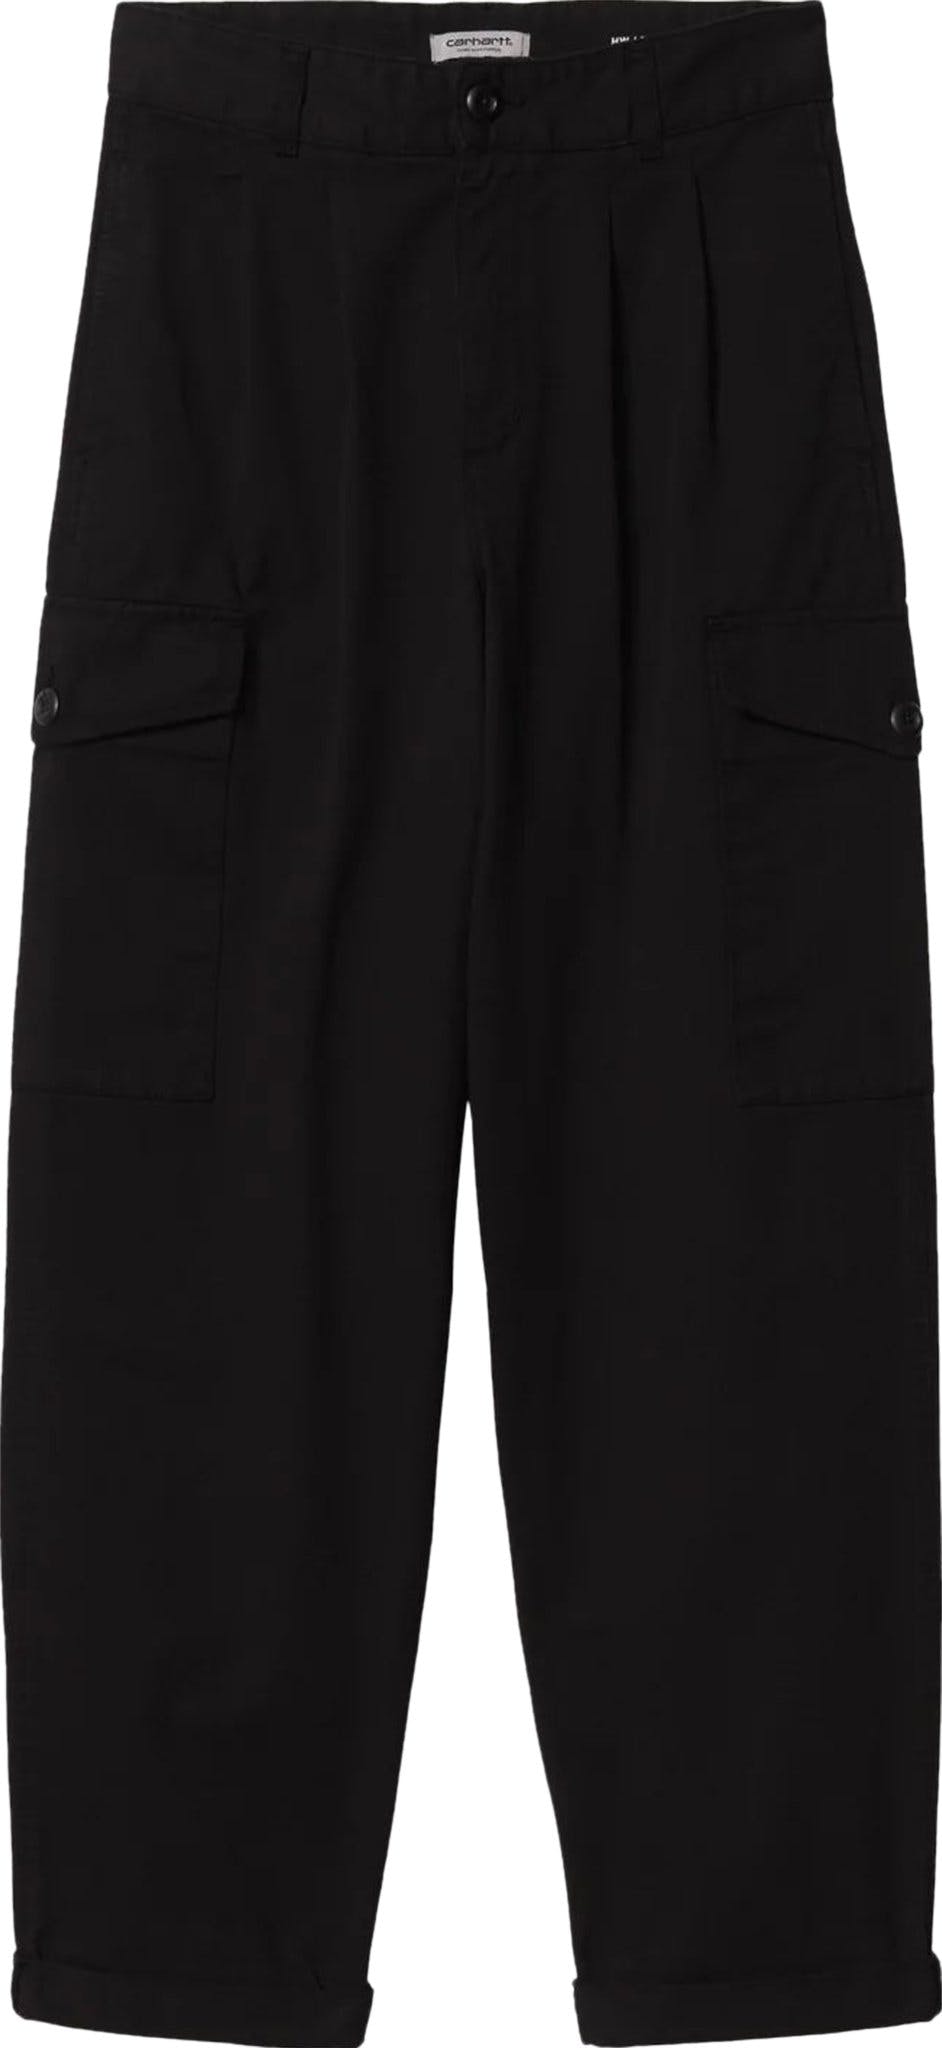 Product image for Collins Pant - Women's